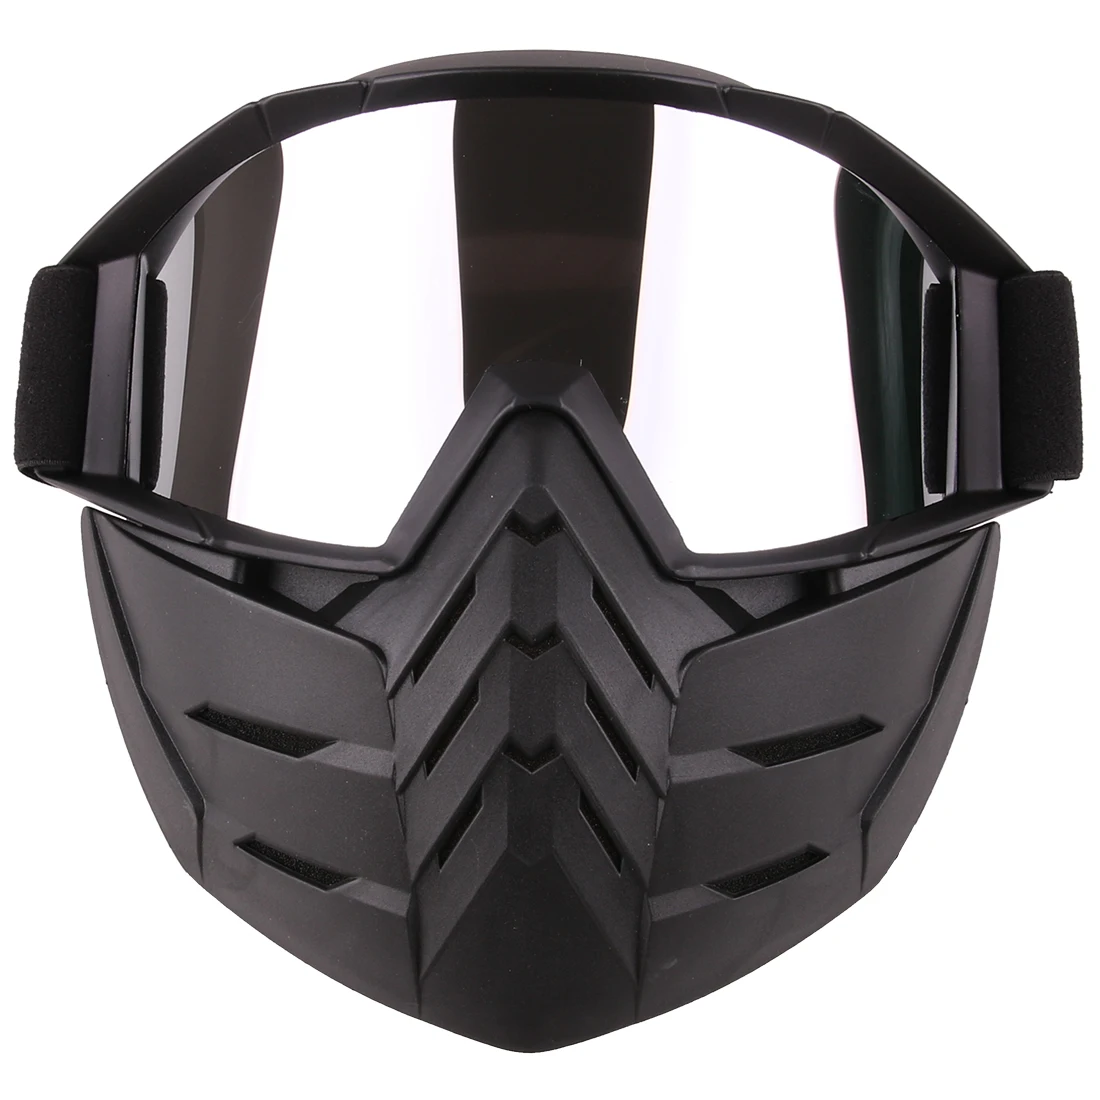 Airsoft Cool Tactical Mask Soft Bullet Dart Eye Protective Mirror Face Mask for Outdoor Paintball WG Shooting Protective Mask - Цвет: Серебристый